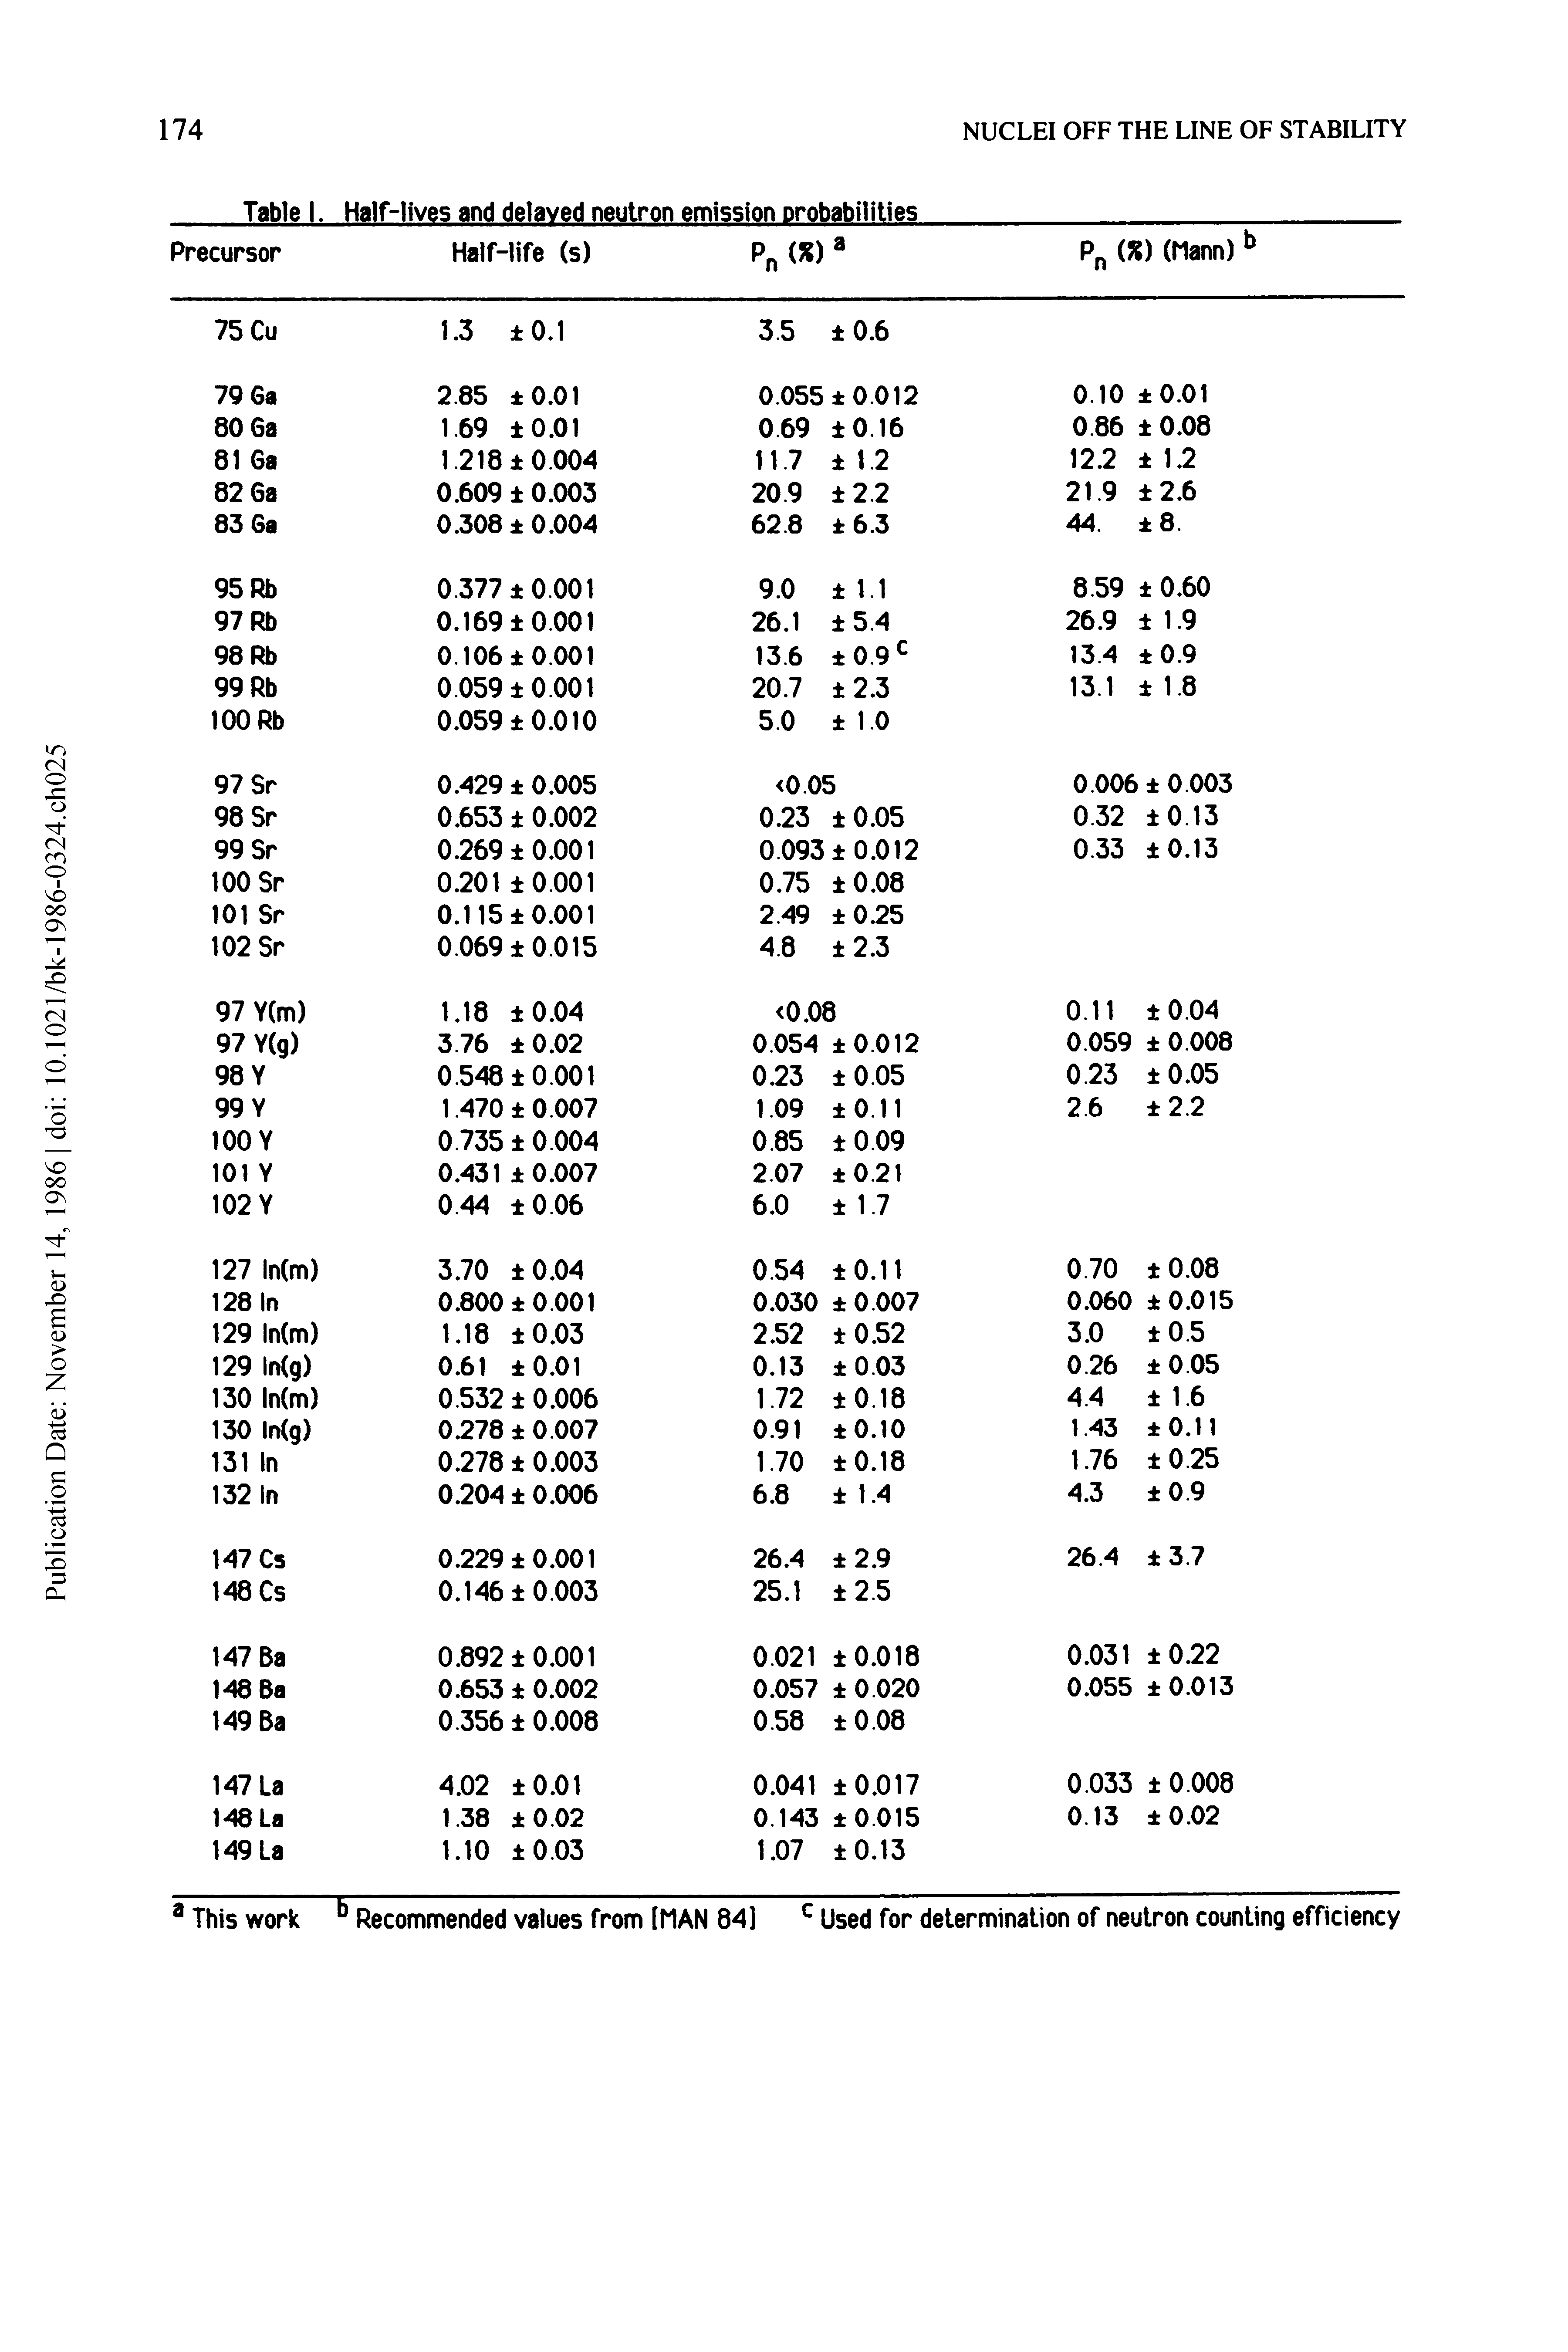 Table I. Half-lives and delayed neutron emission probabilities...